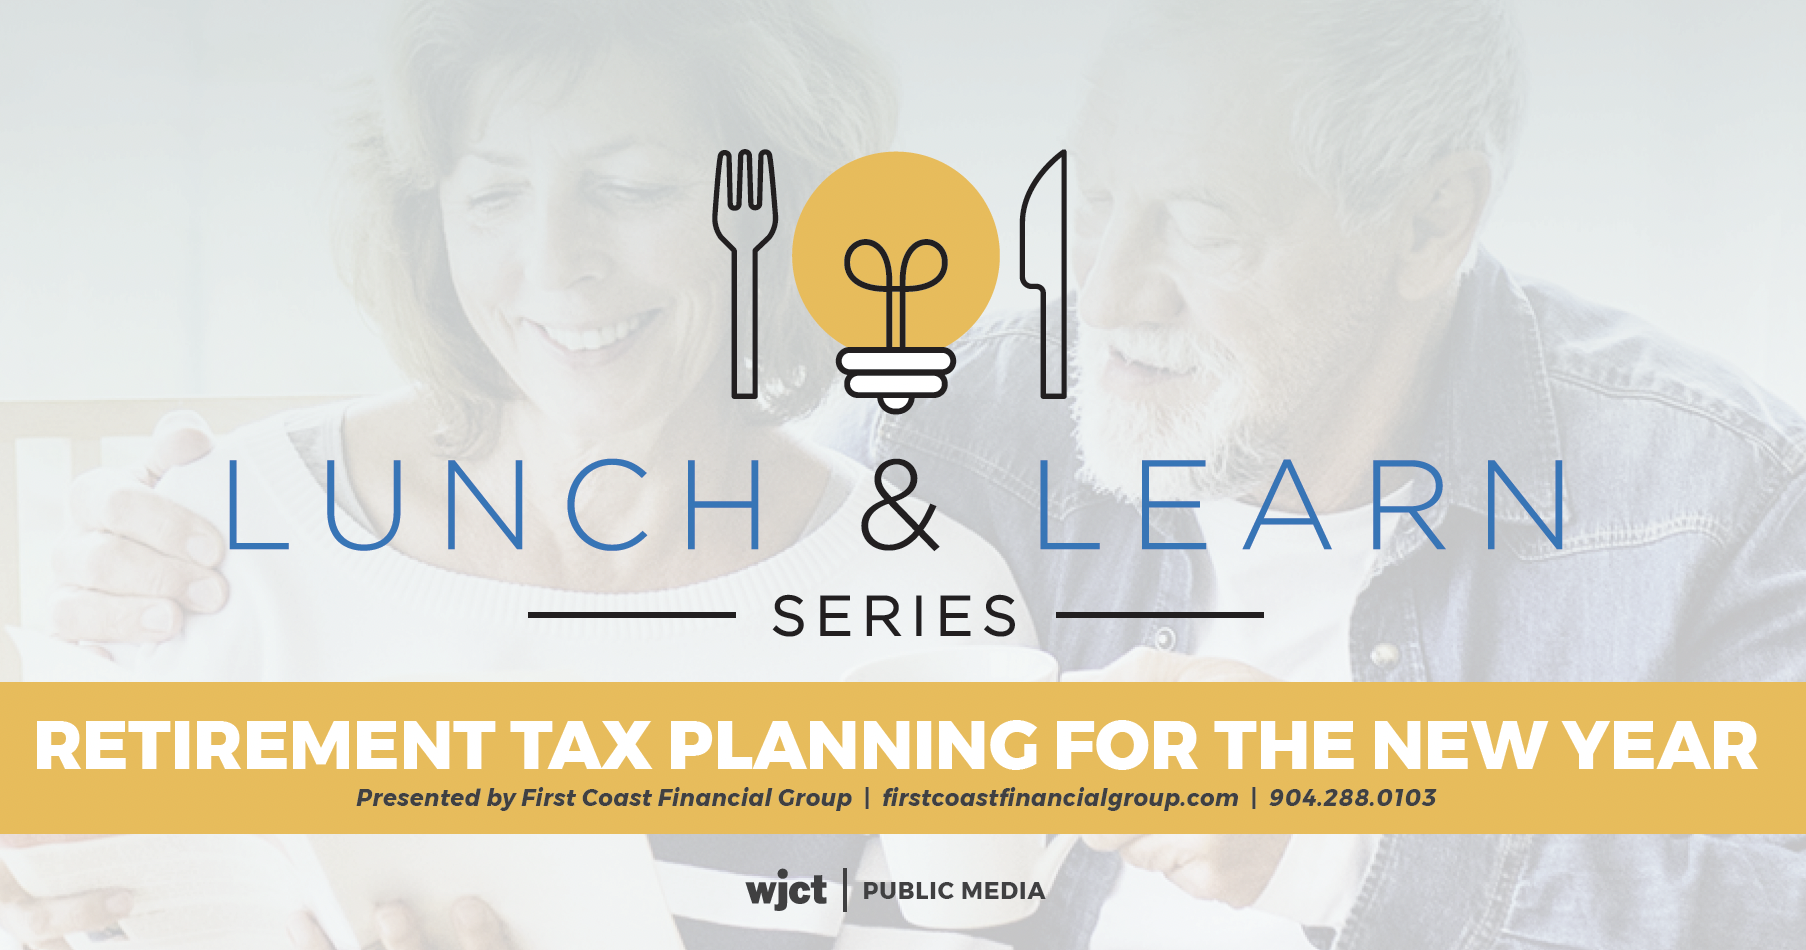 Lunch & Learn - Retirement Tax Planning for the New Year